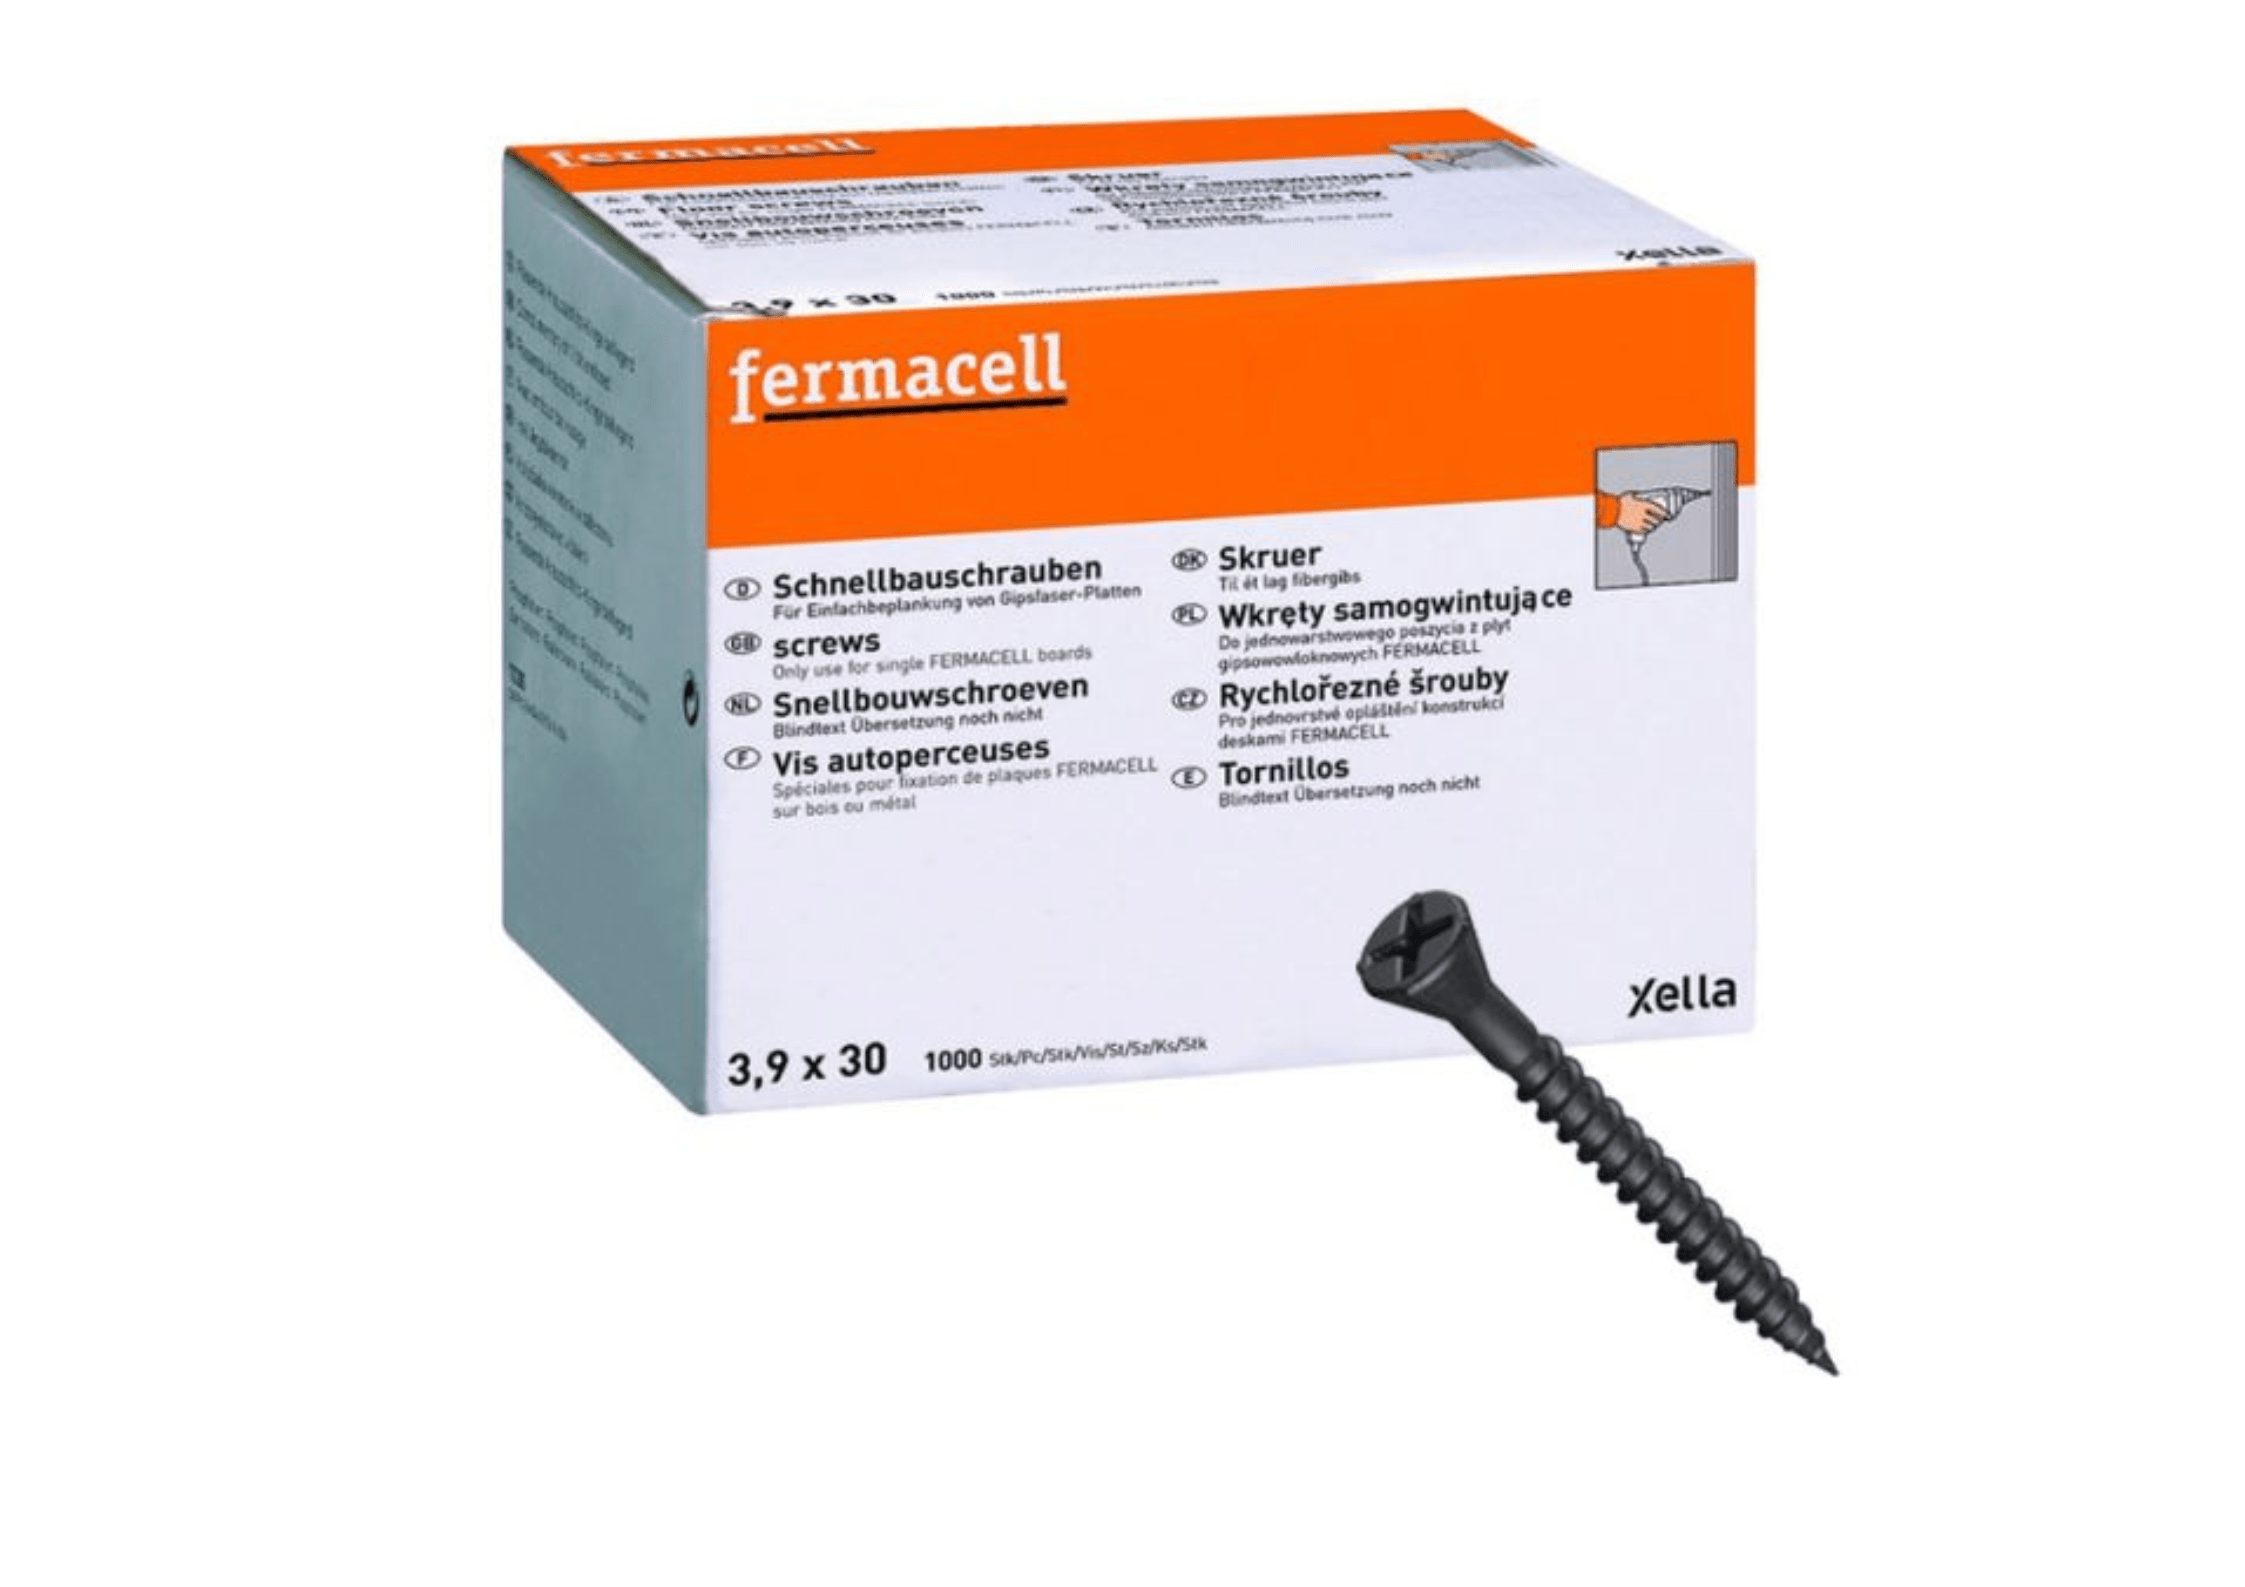 Fermacell Insulation 250 pcs Fermacell®  Screws 3.9 x 30mm 4007548001663 IUK01542 fermacell®  Screws 3.9 x 30mm | insulationuk.co.uk